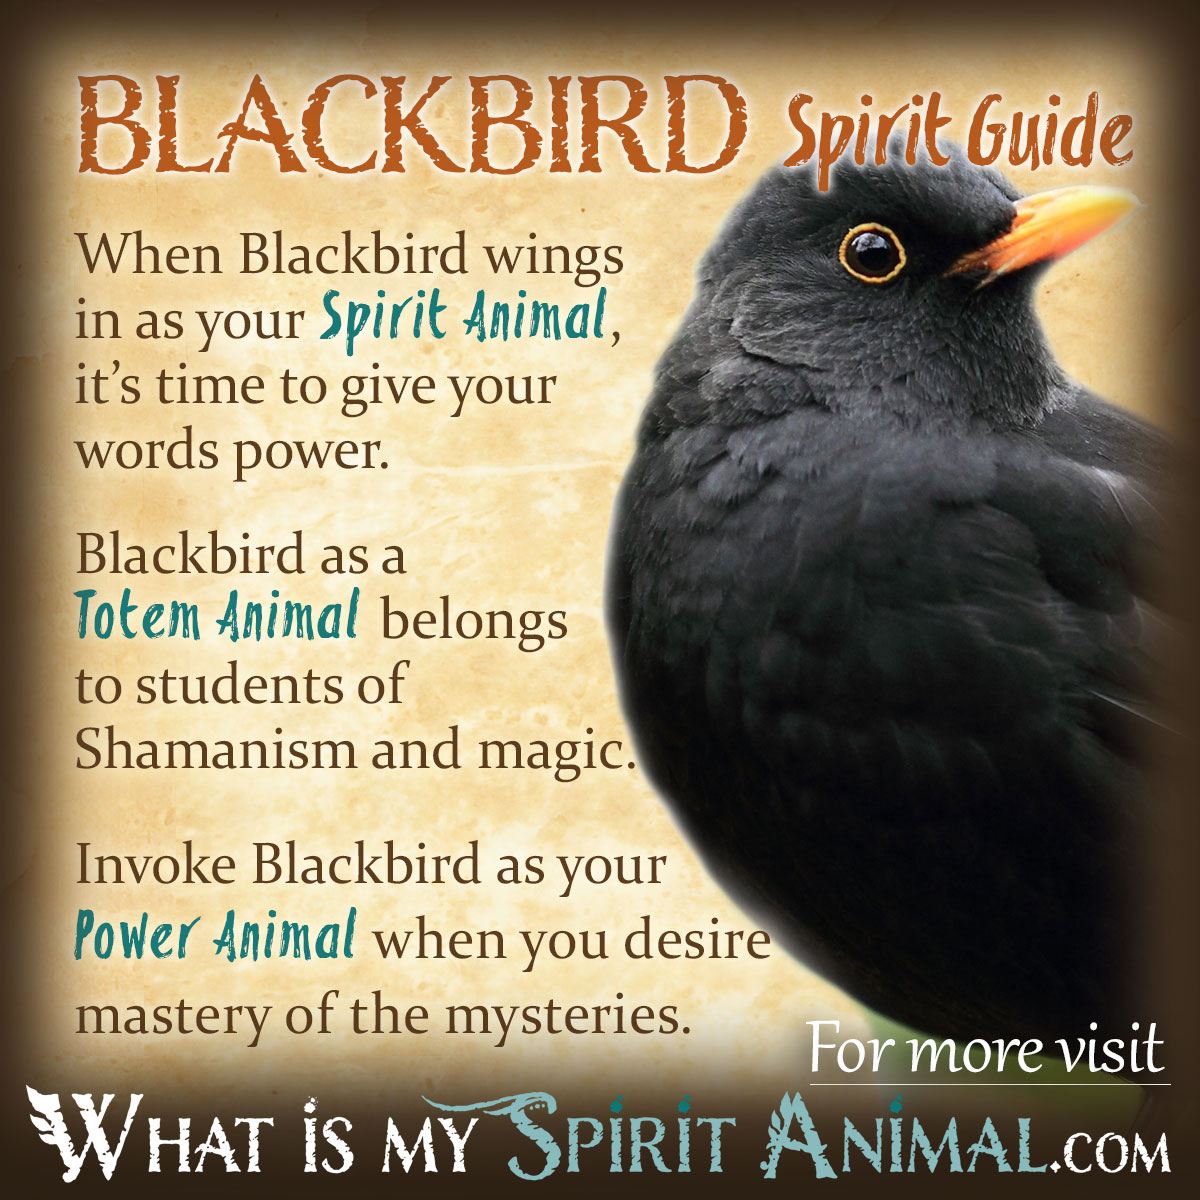 Is a black bird an omen of death and bad things?